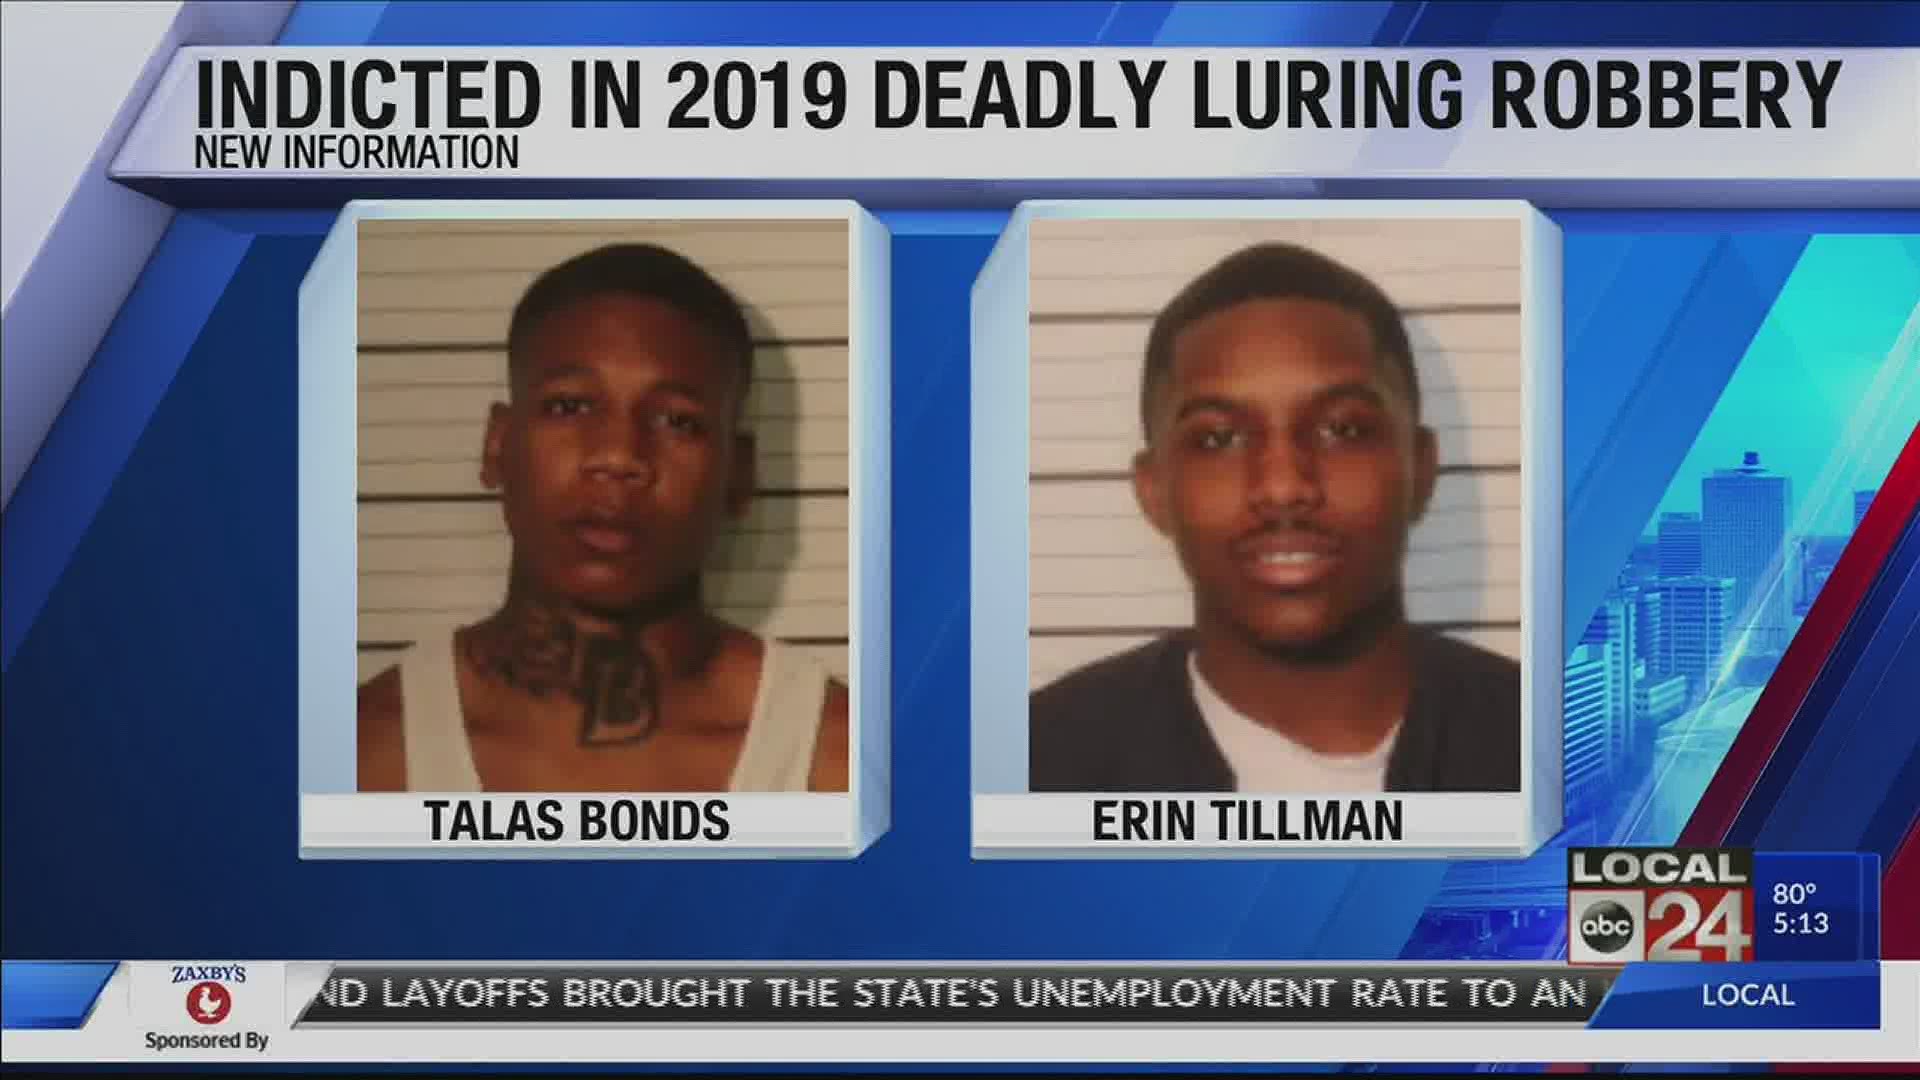 Talas Bonds and Erin Tillman were indicted this week on charges of first-degree murder and attempted aggravated robbery.